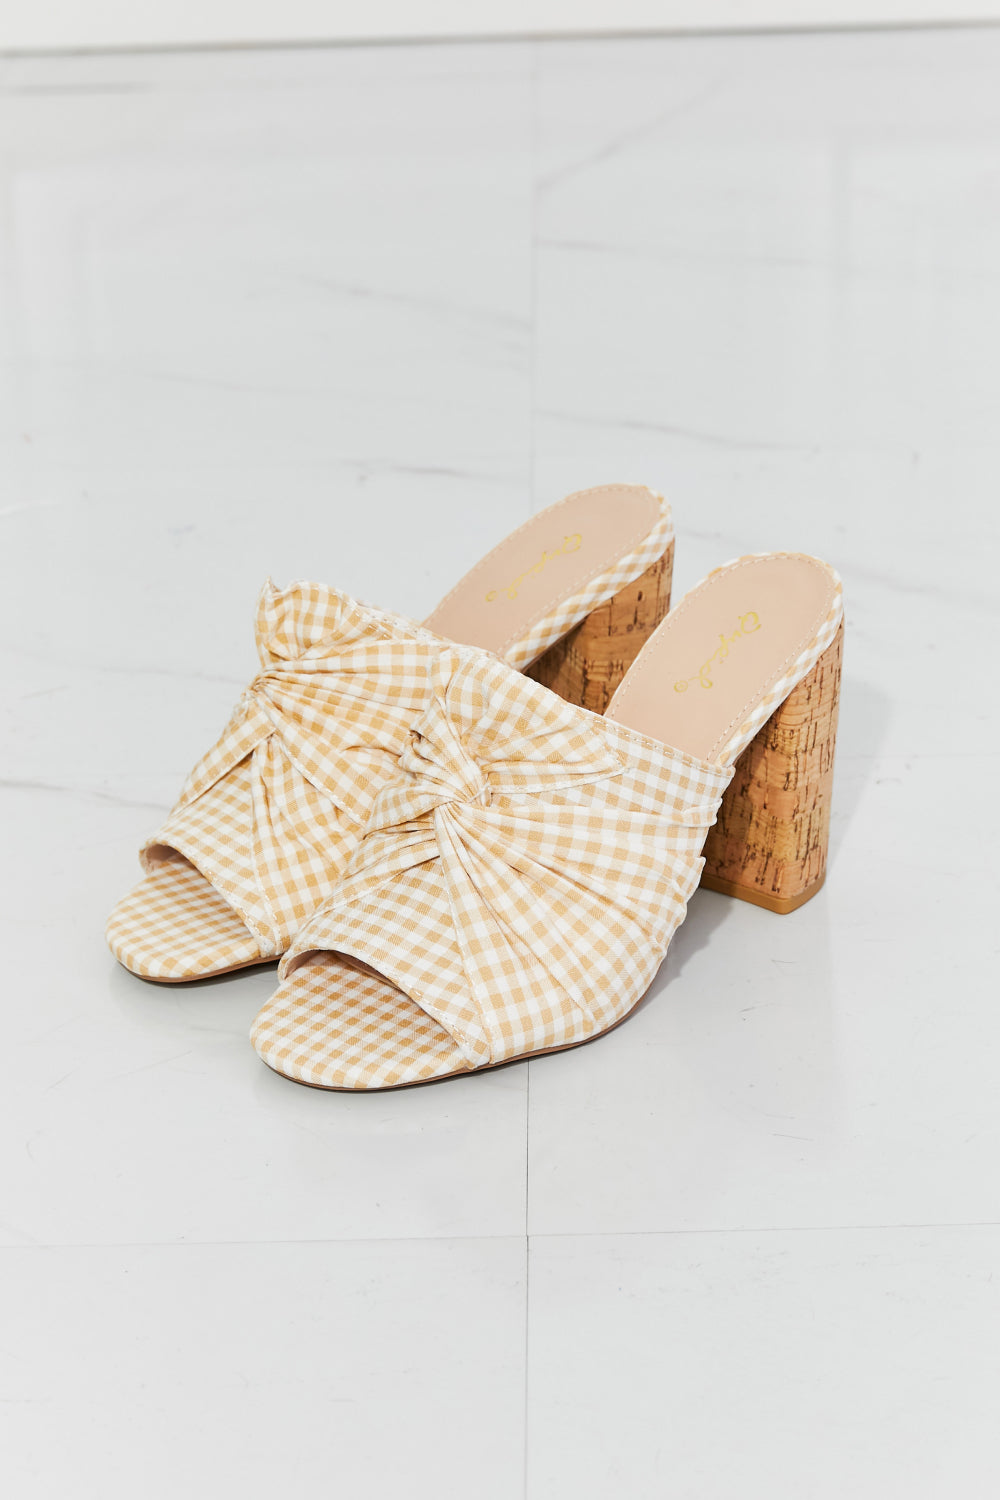 SPRING INTO STYLE PEEP TOE BLOCK HEAL MULES